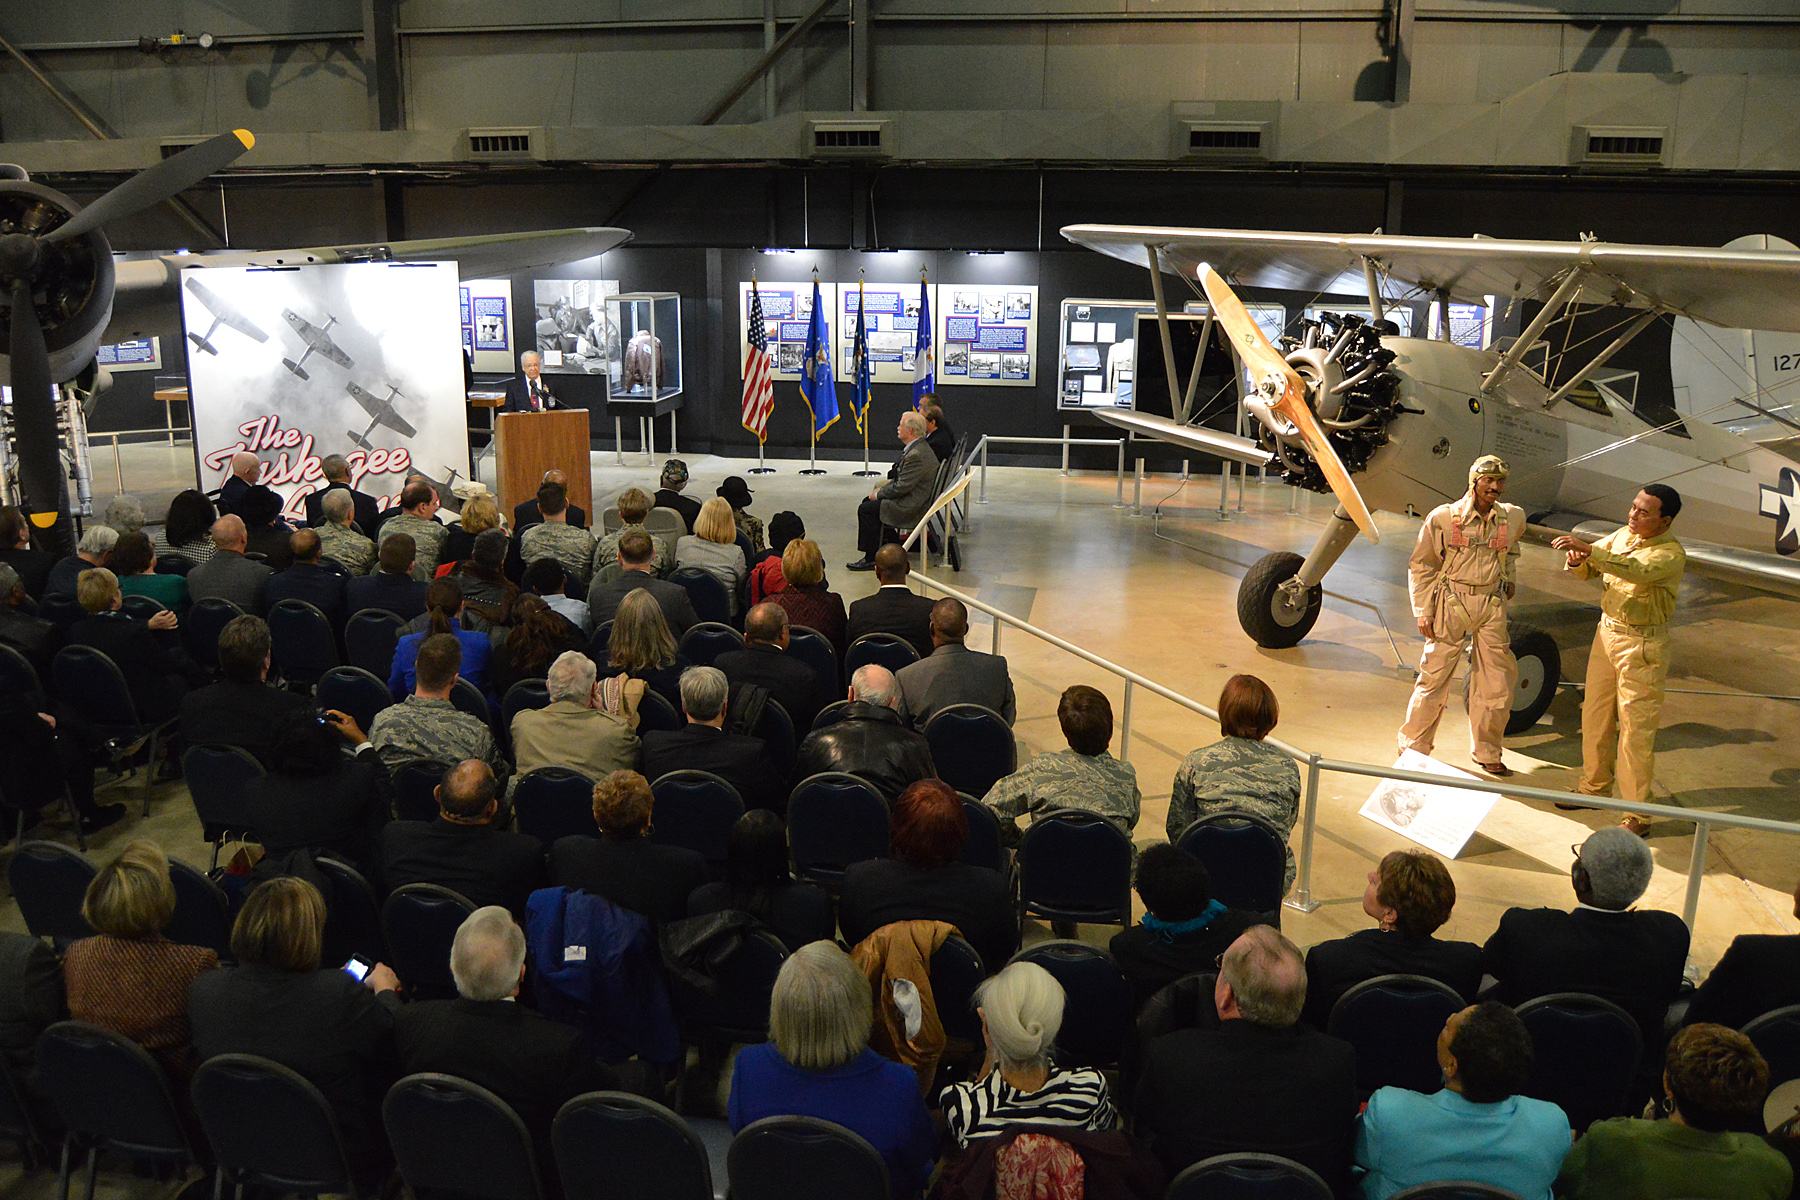 Tuskegee Airmen, families, friends and guests, gathered for the expanded Tuskegee Airmen exhibit opening in the WWII Gallery at the National Museum of the U.S. Air Force on Feb. 10, 2015. (U.S. Air Force photo) 